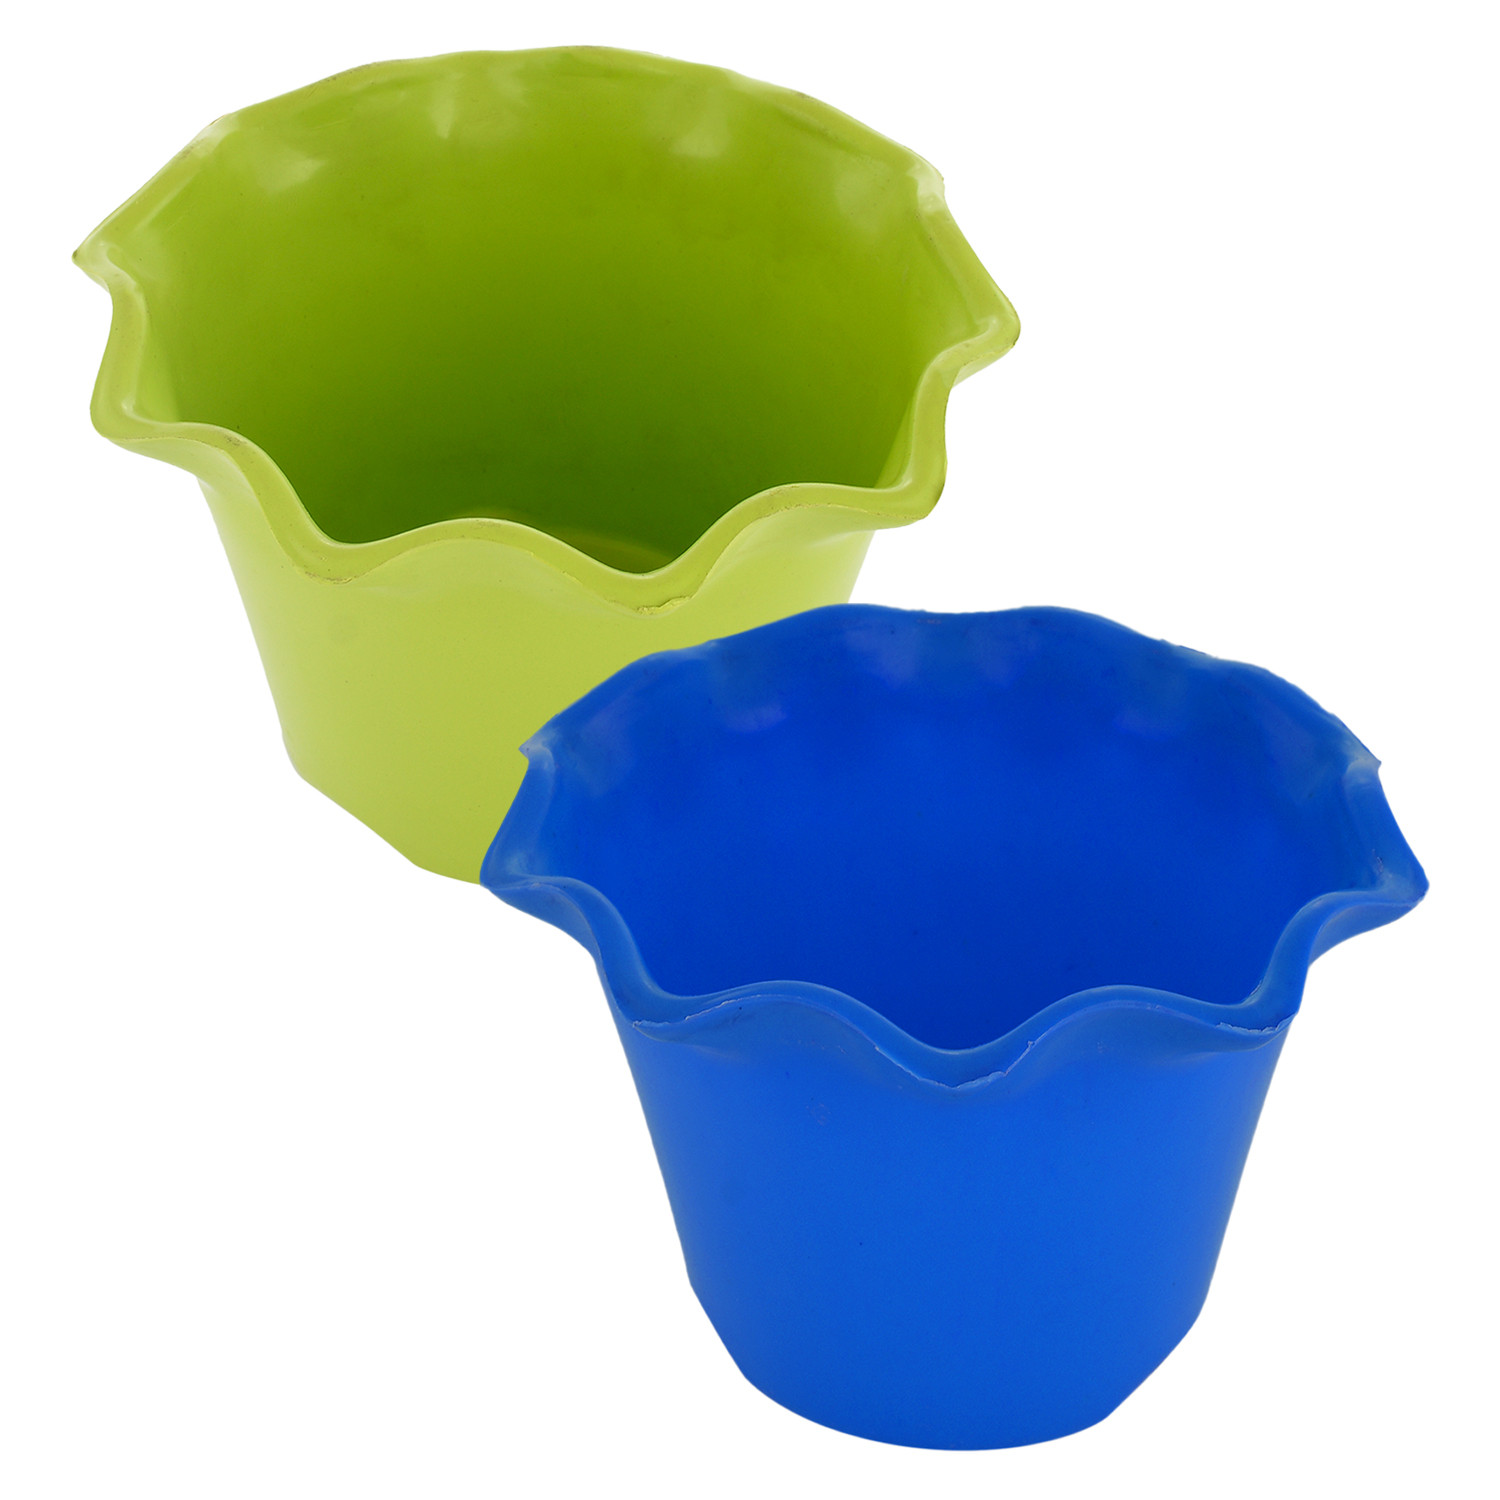 Kuber Industries Blossom Flower Pot|Durable Plastic Flower Pot|Gamla With Drain Holes for Home Décor|Balcony|Garden|8 Inch|Pack of 2 (Blue & Green)